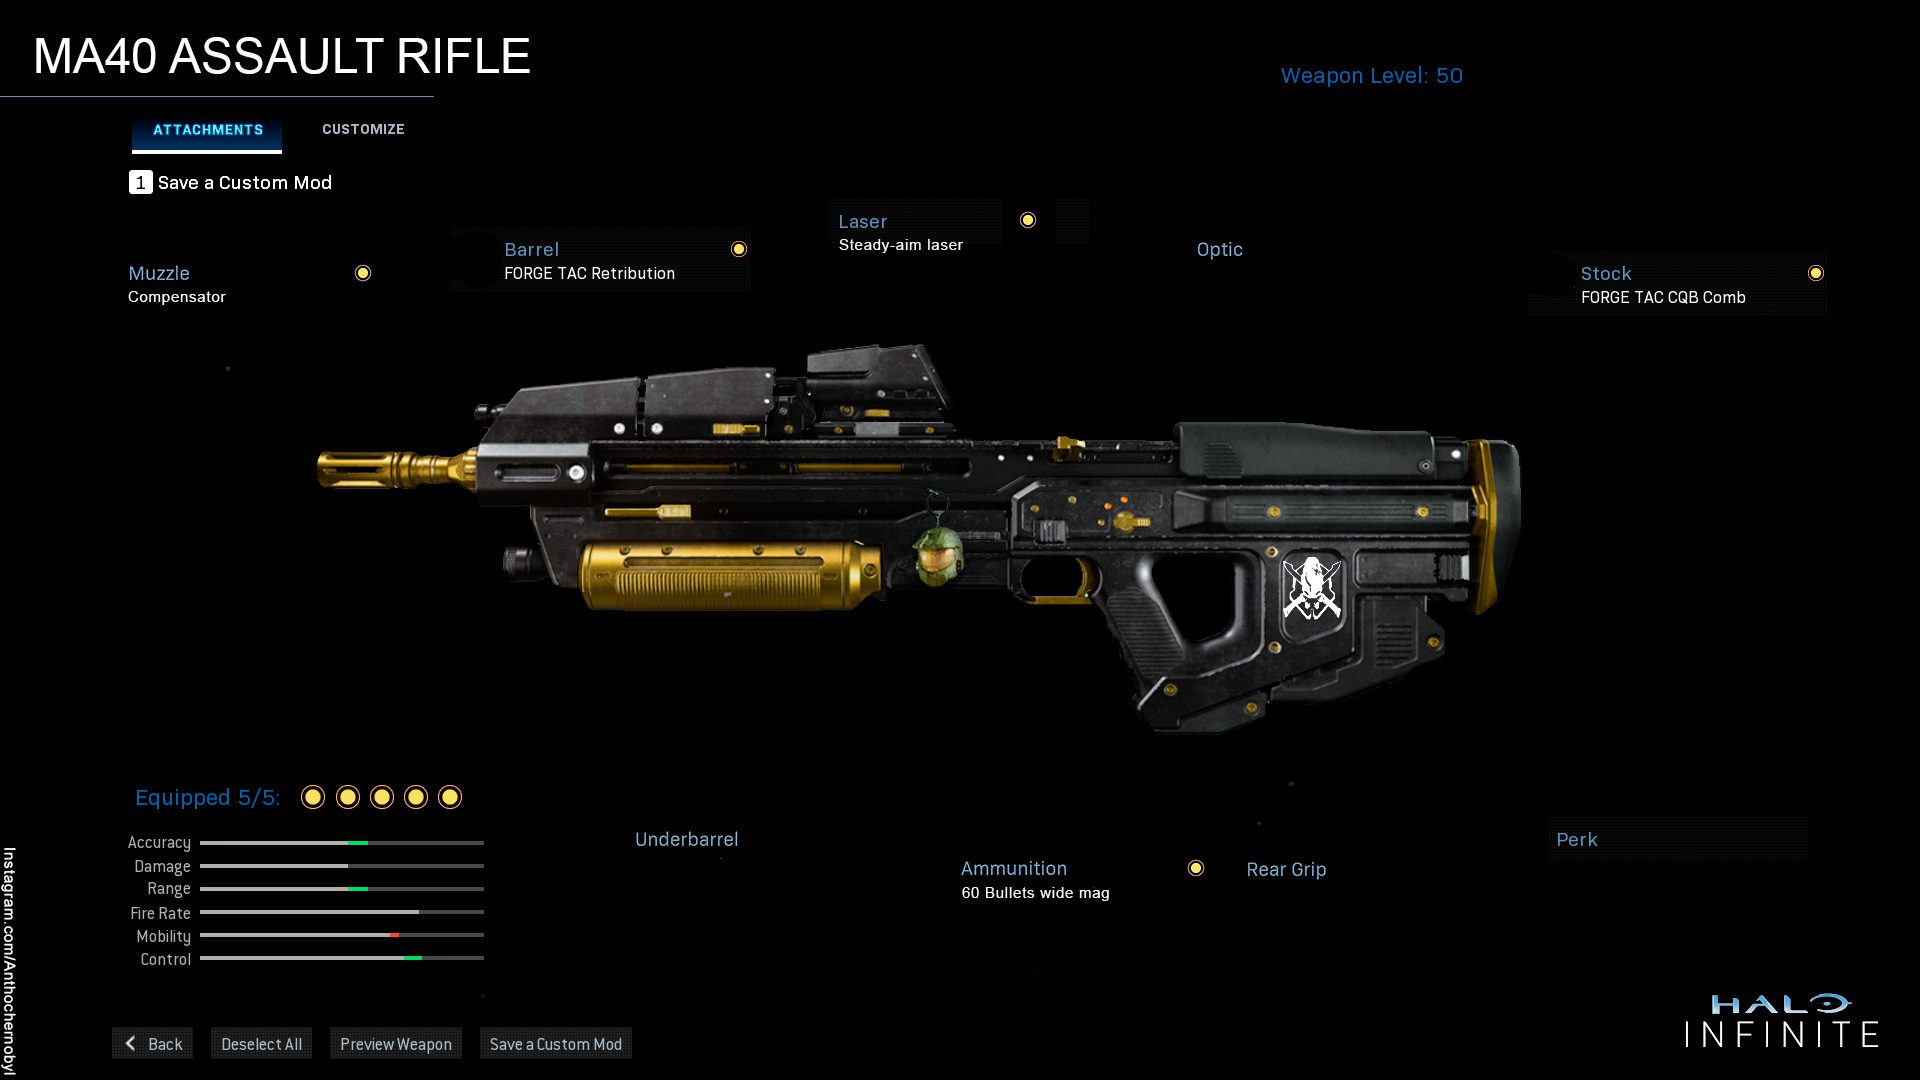 One user imagines what weapon customization will look like in Halo Infinite